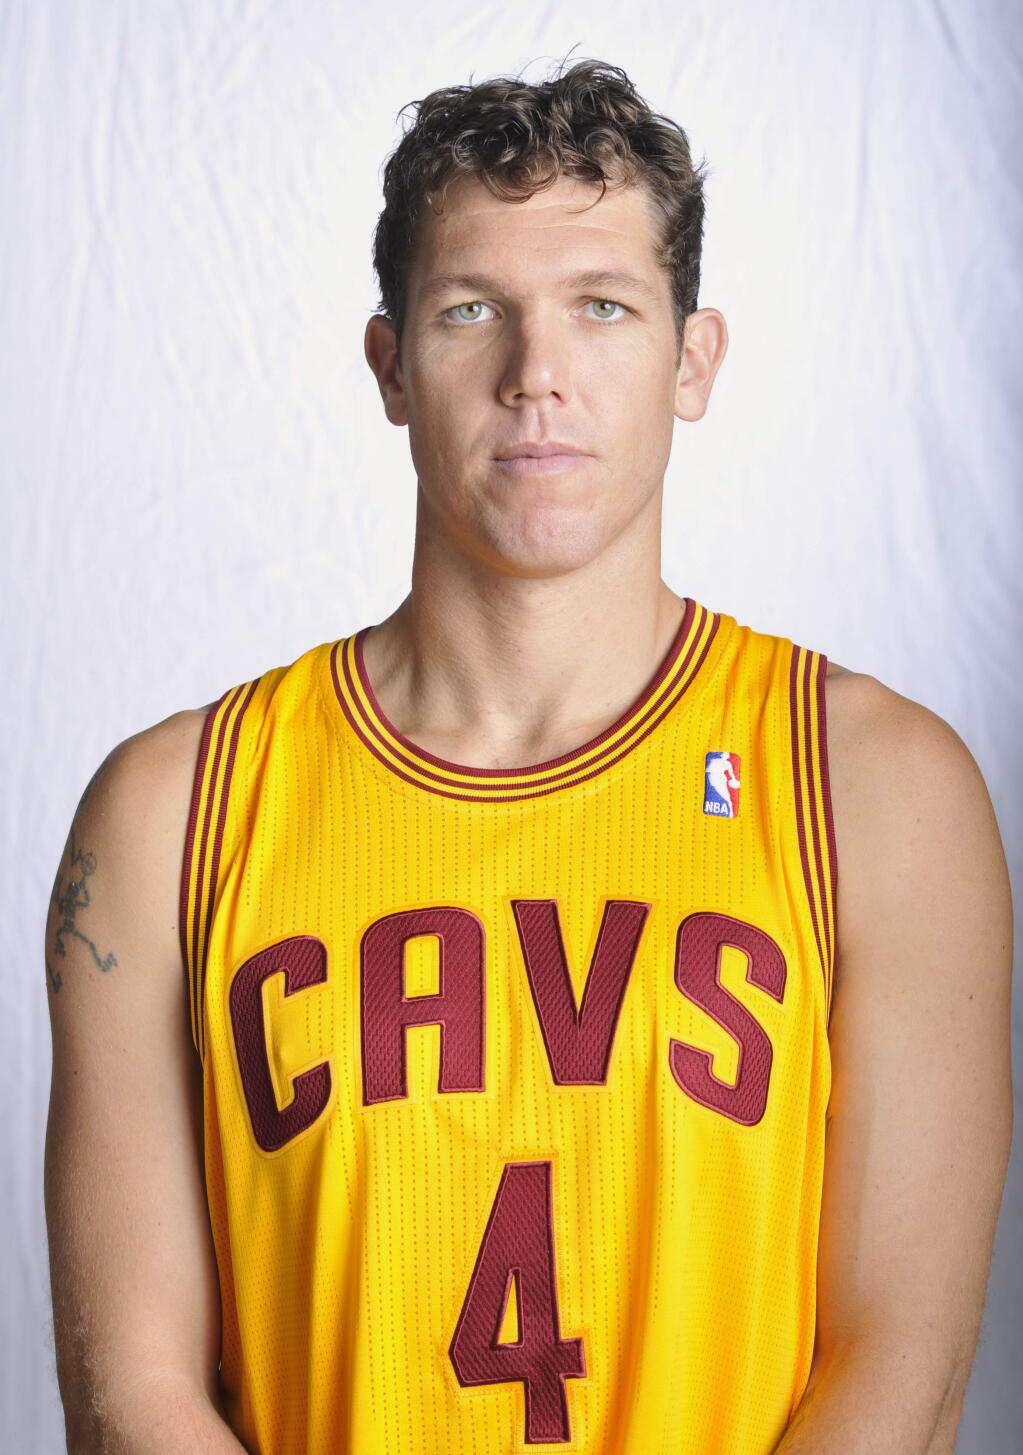 Cleveland Cavaliers forward Luke Walton is shown at the Cavs media day at the Cavs training facility in Independence, Ohio, Monday, Oct. 1, 2012. (AP Photo/Phil Long)